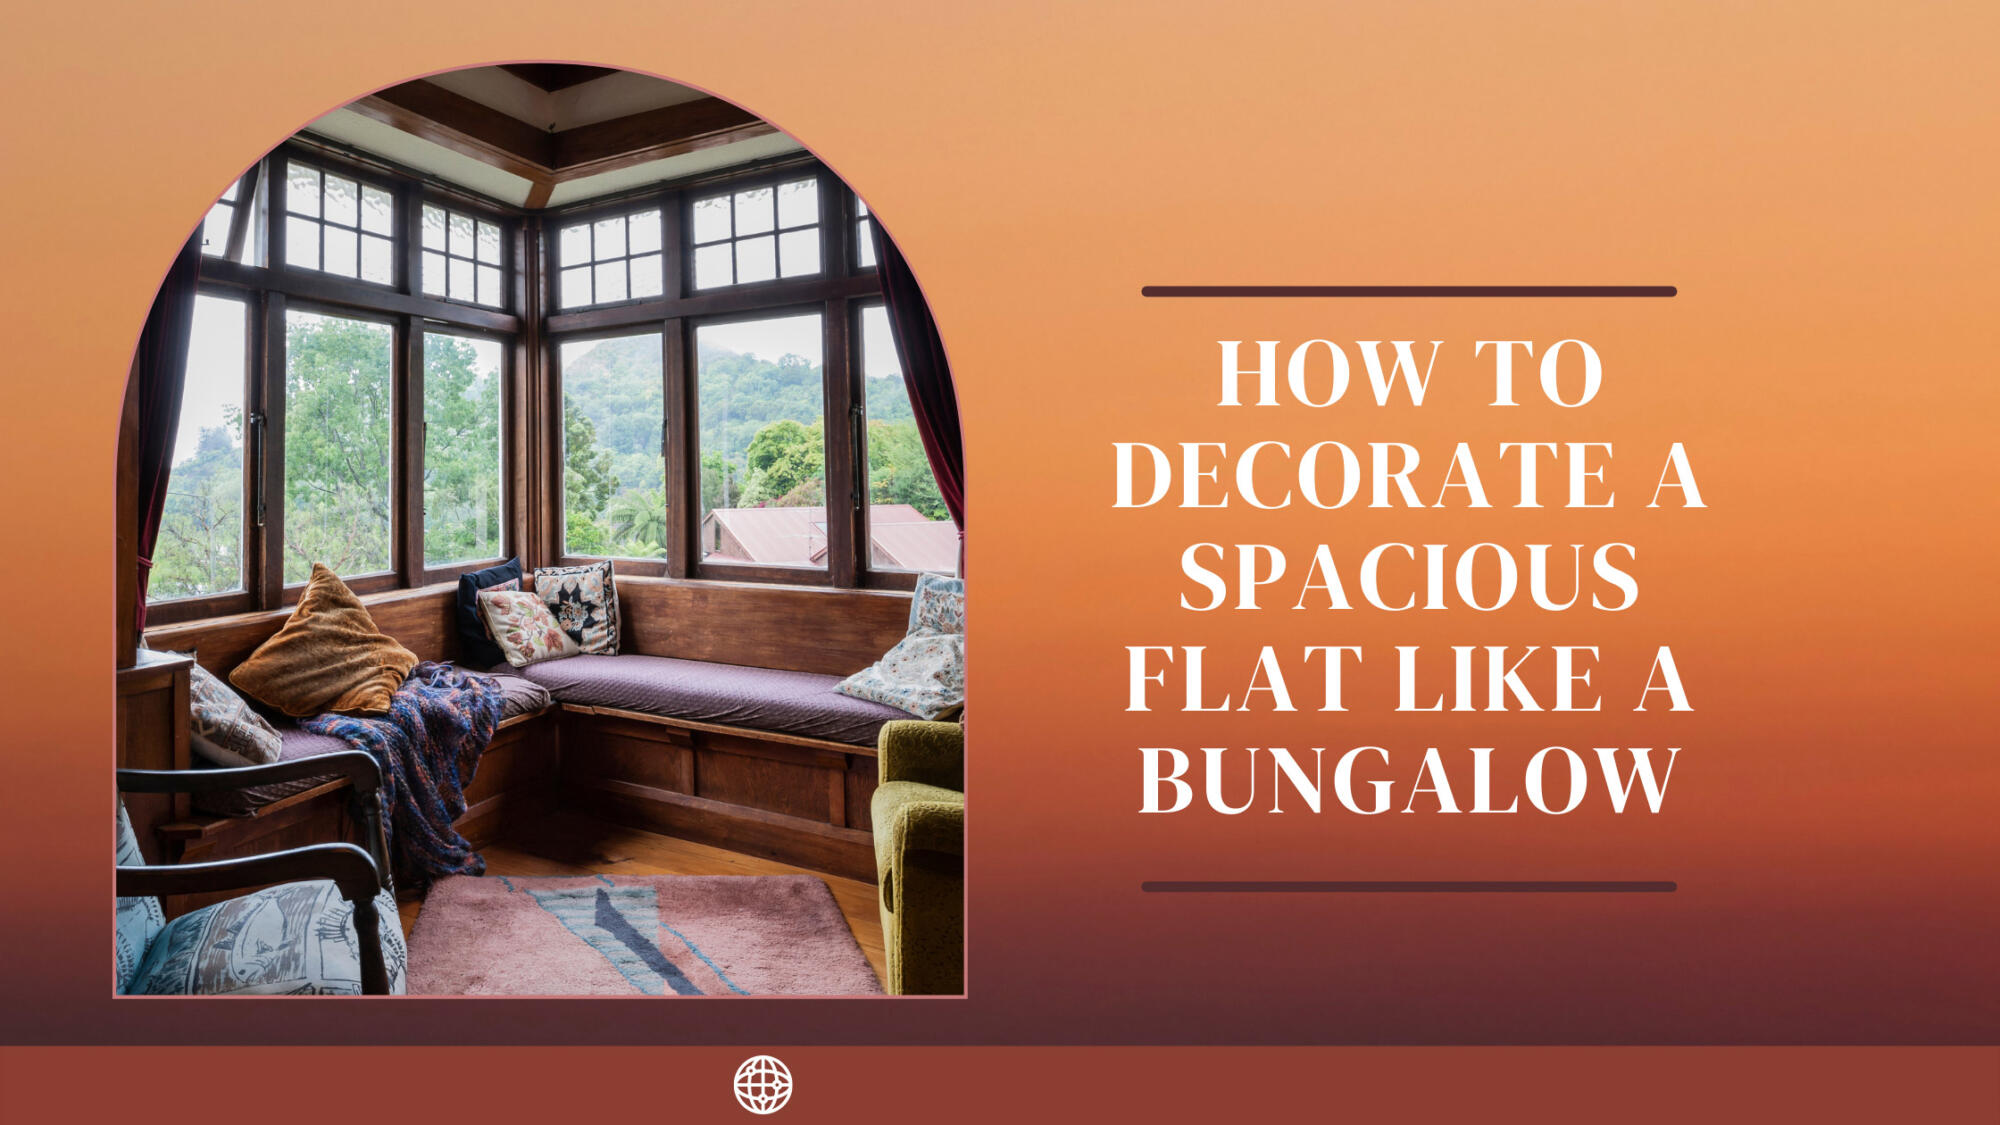 How to decorate a spacious flat in a bungalow style.